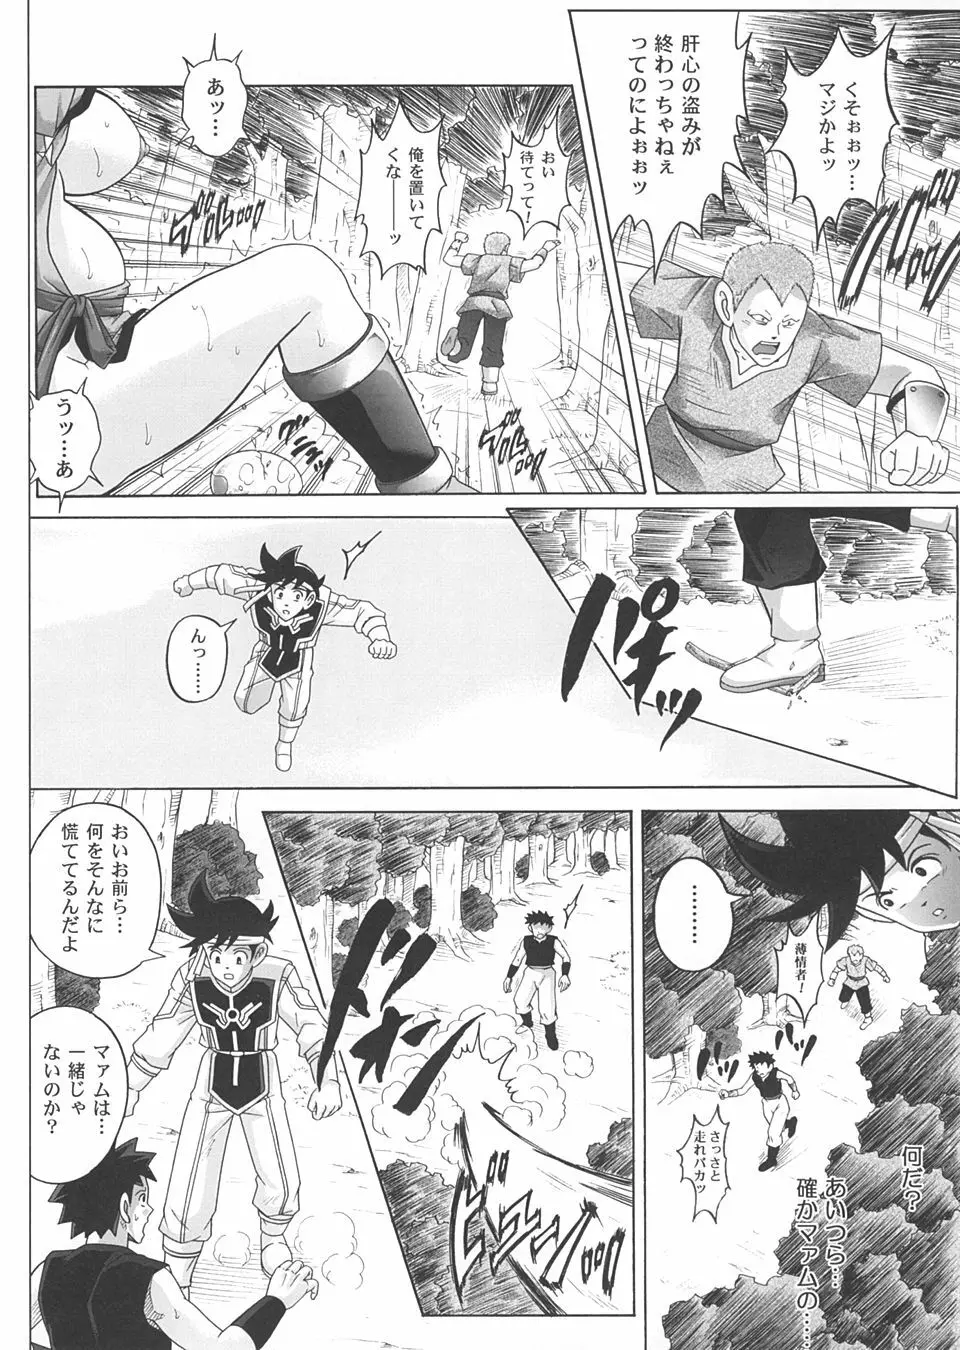 Sinclair 2 & Extra -シンクレア2- - page45